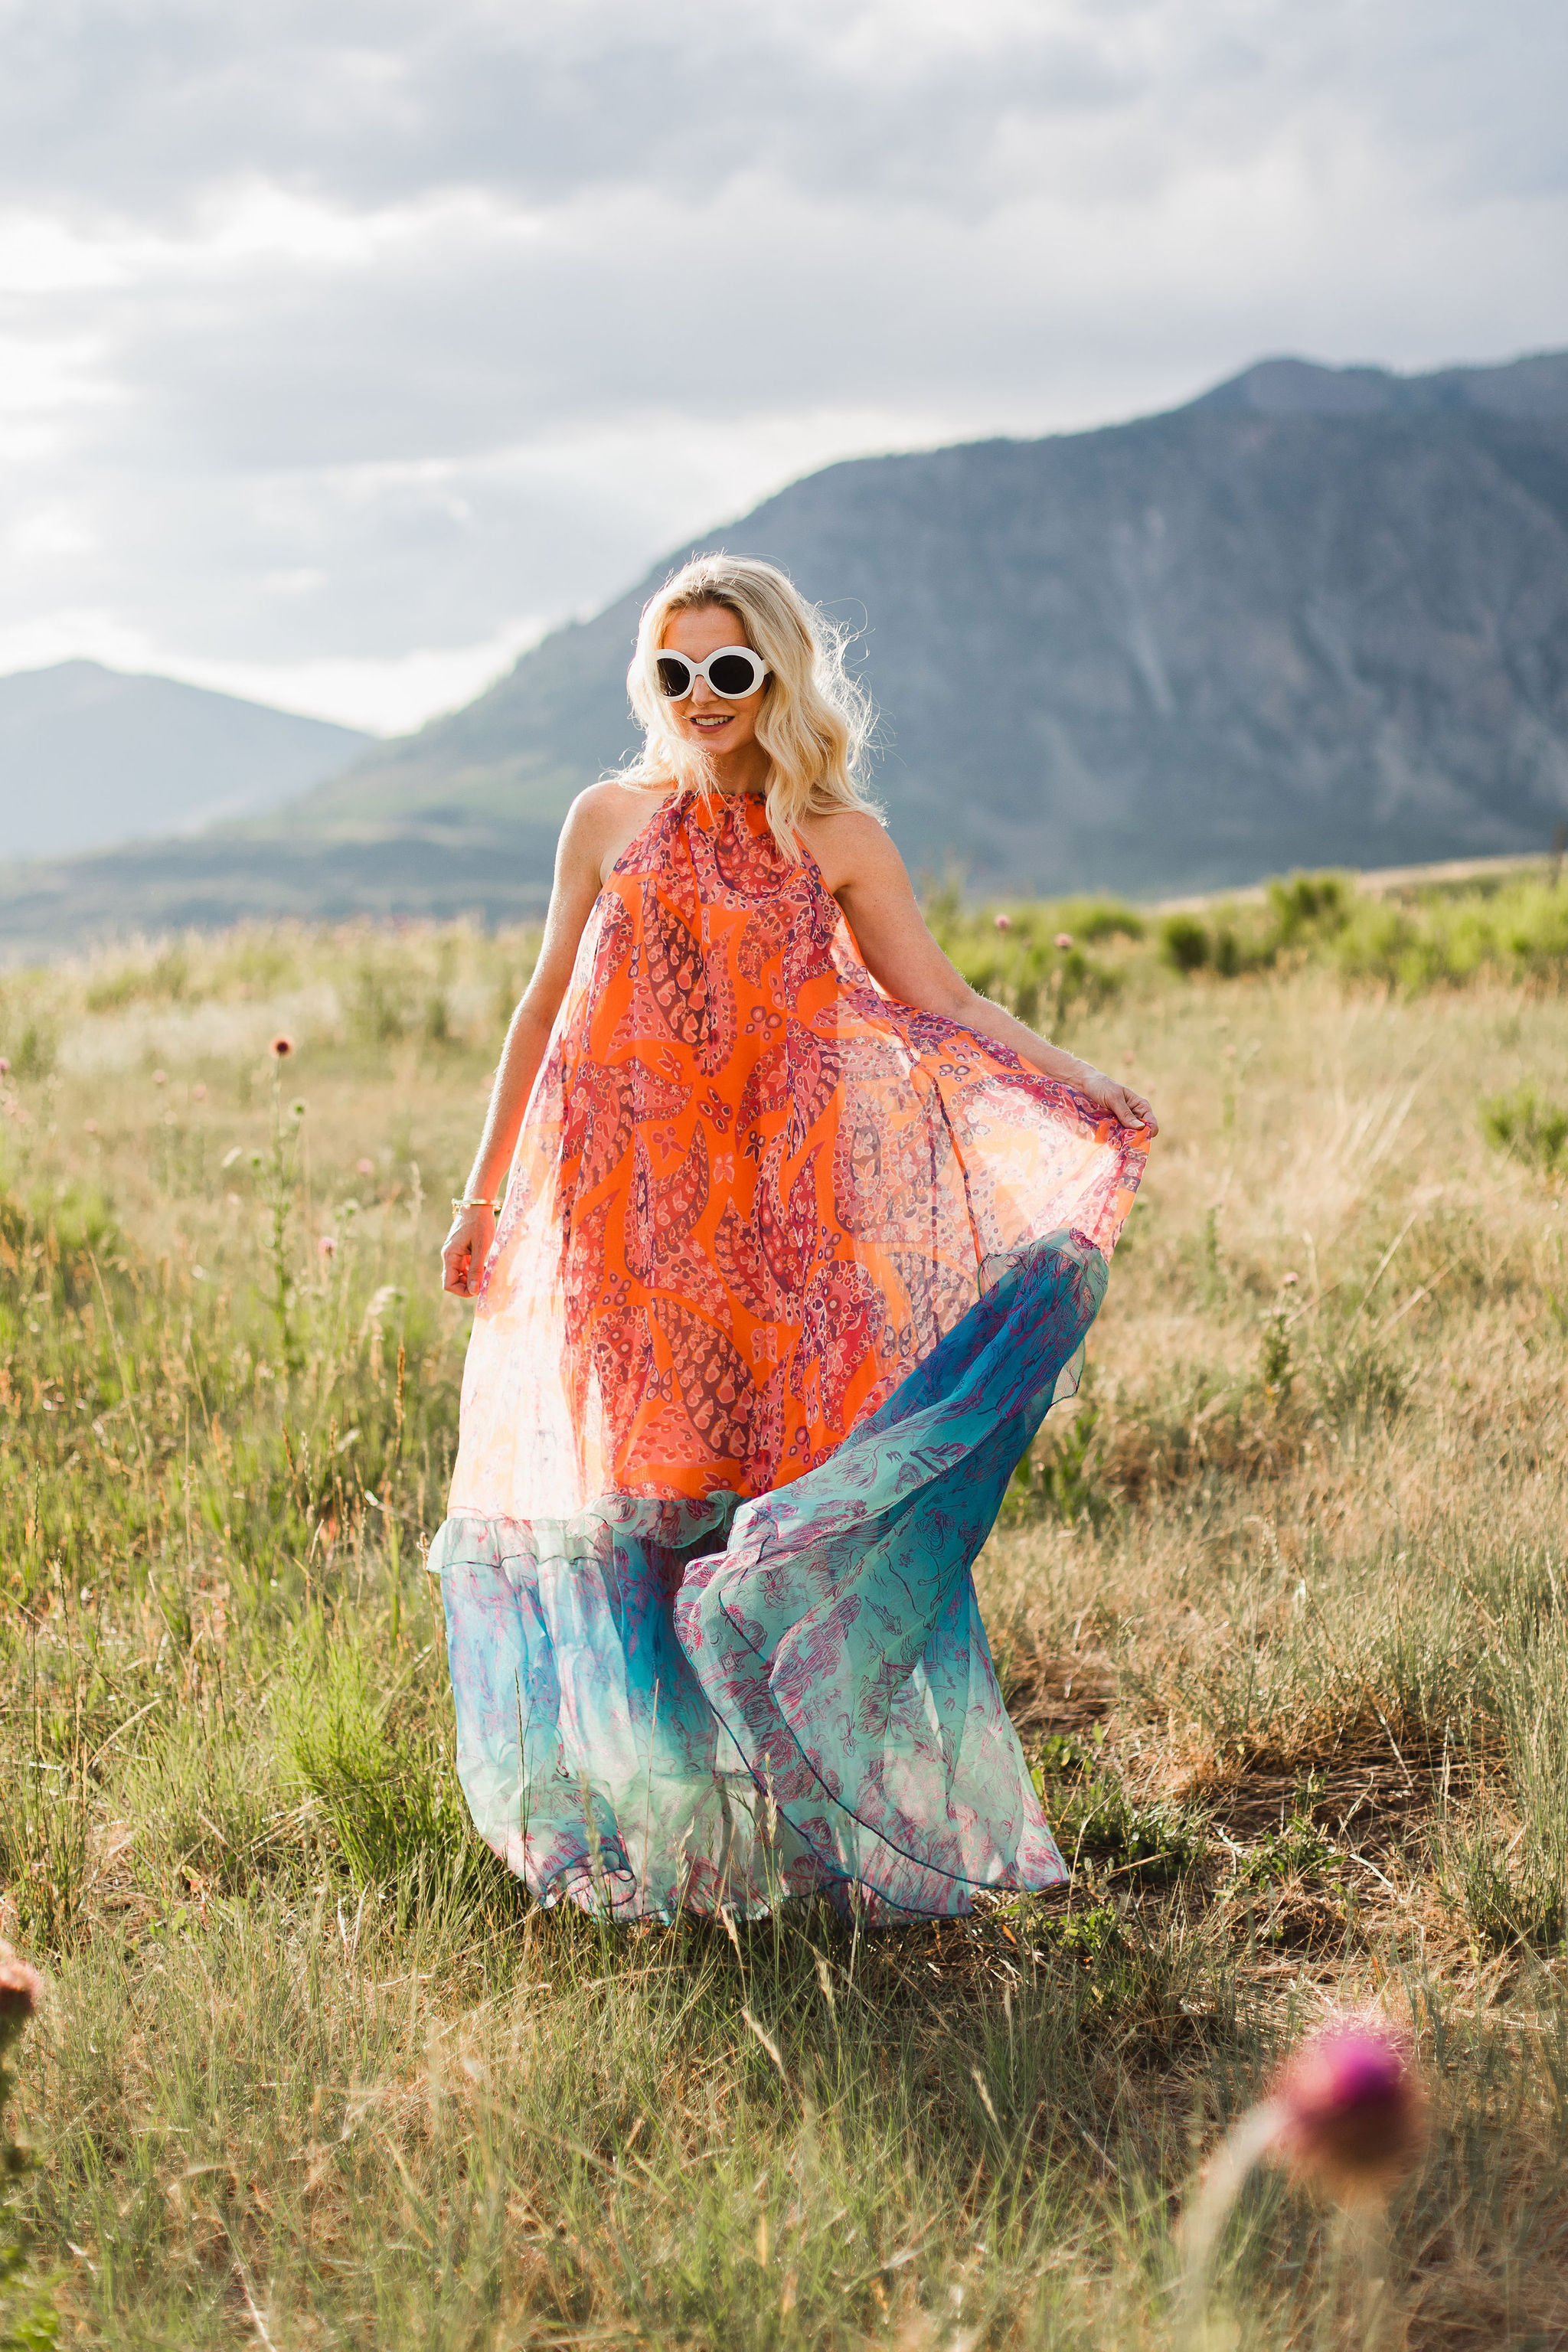 Ina dress by Staud in a tall grass field in the mountains of telluride featuring INA staud dress in orange and blue on fashion over 40 blogger Erin Busbee of Busbee Style